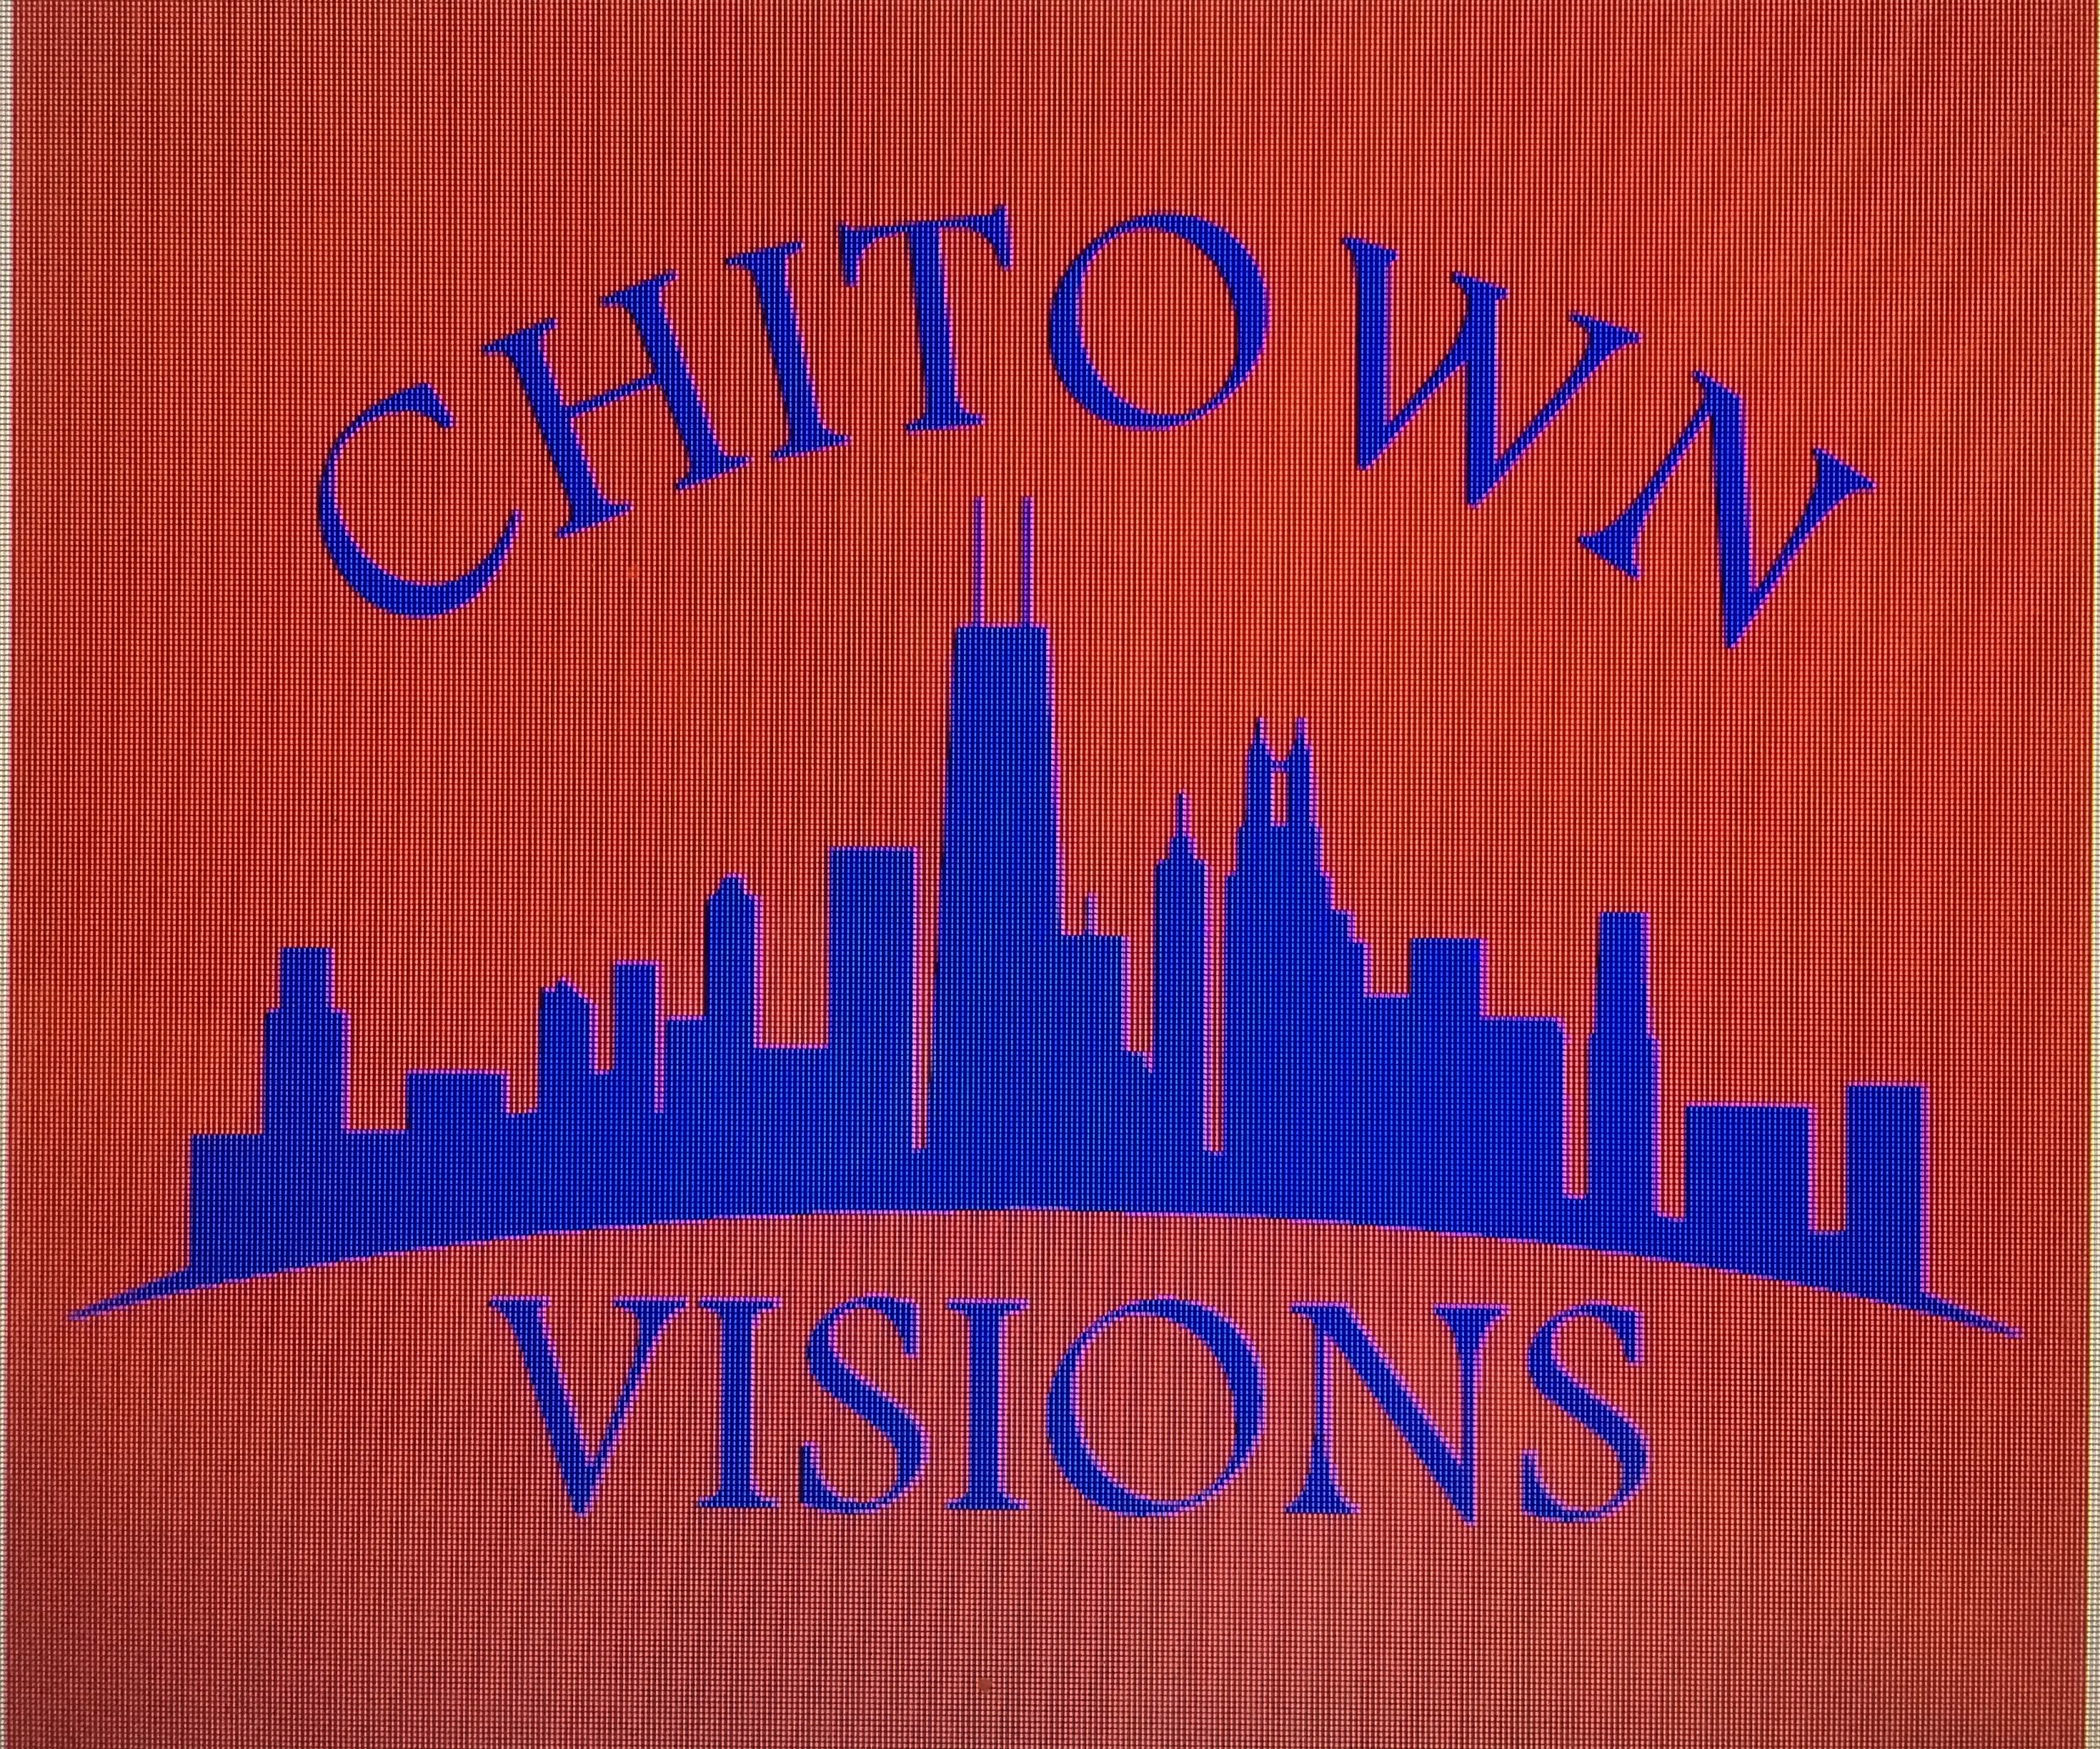 CHITOWN VISIONS